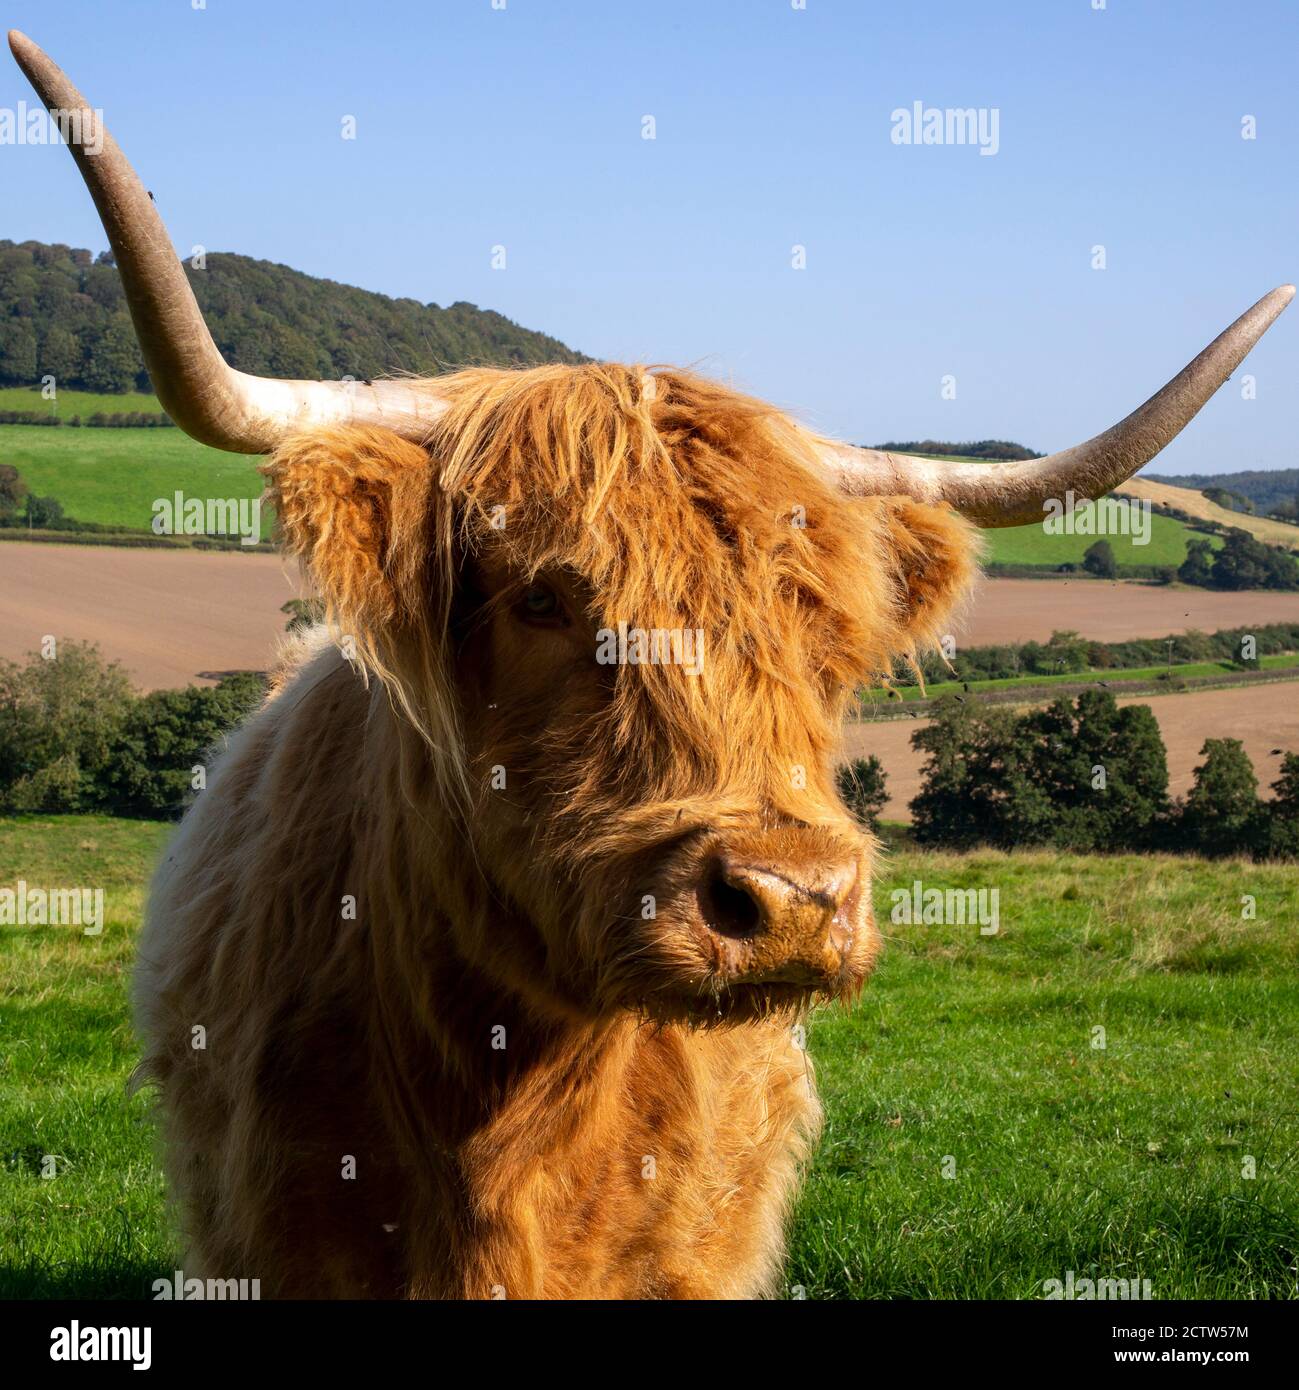 An inquisitive Highland cow in Derwentdale, North Yorkshire, UK Stock Photo